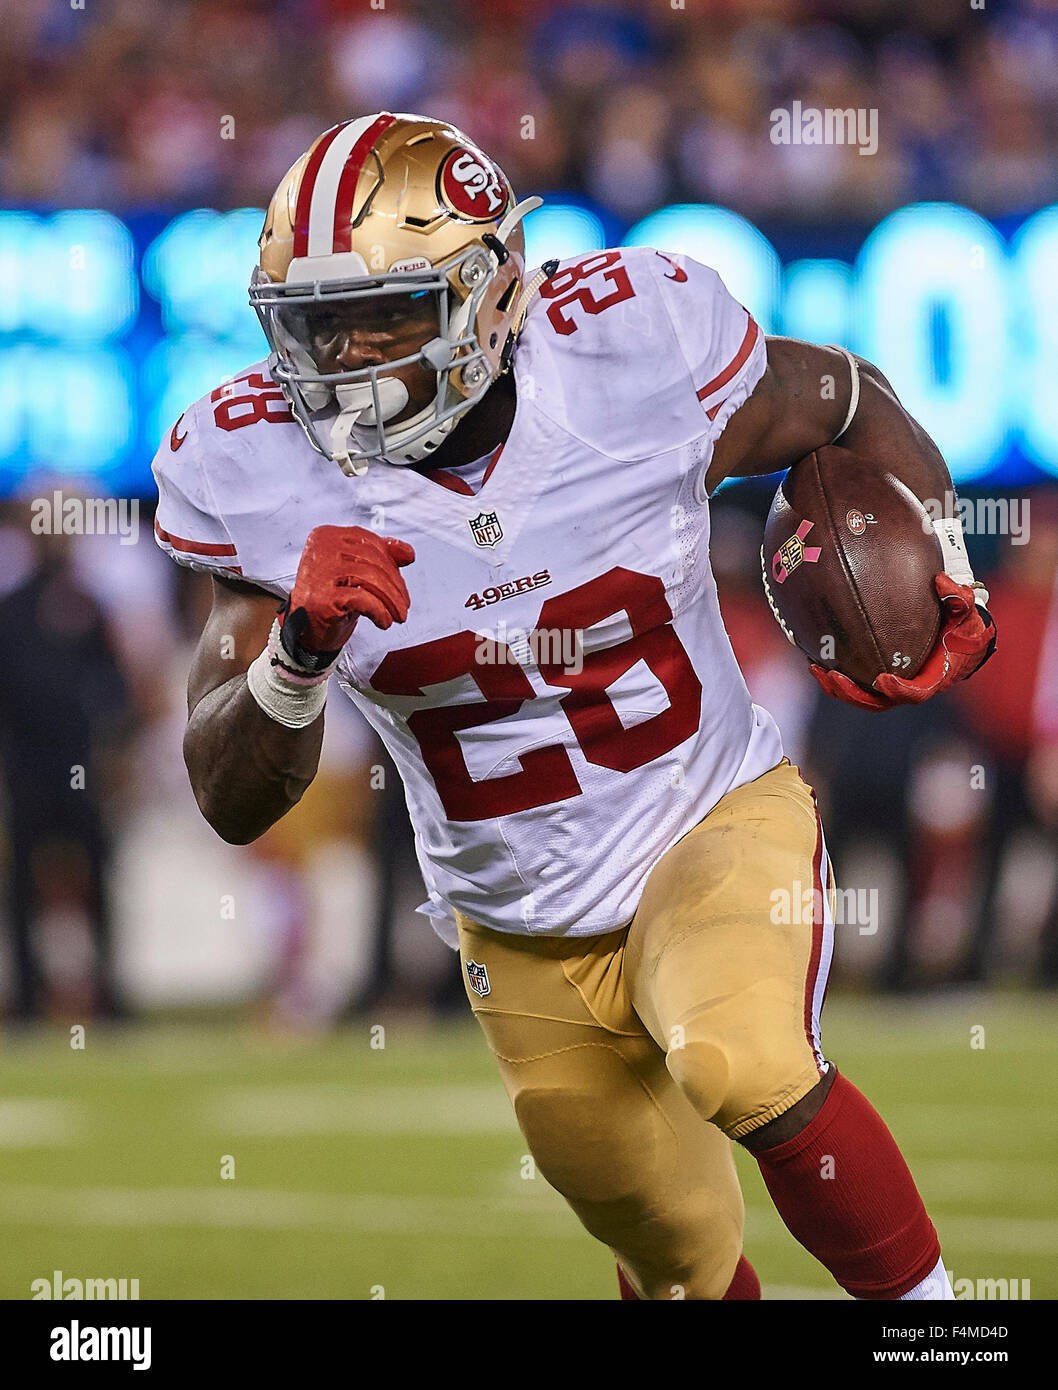 49ers running back Carlos Hyde (28) during NFL action between the San  Francisco 49ers and the New York Giants at Met Life Stadium in East  Rutherford, New Jersey. The Giants defeated the